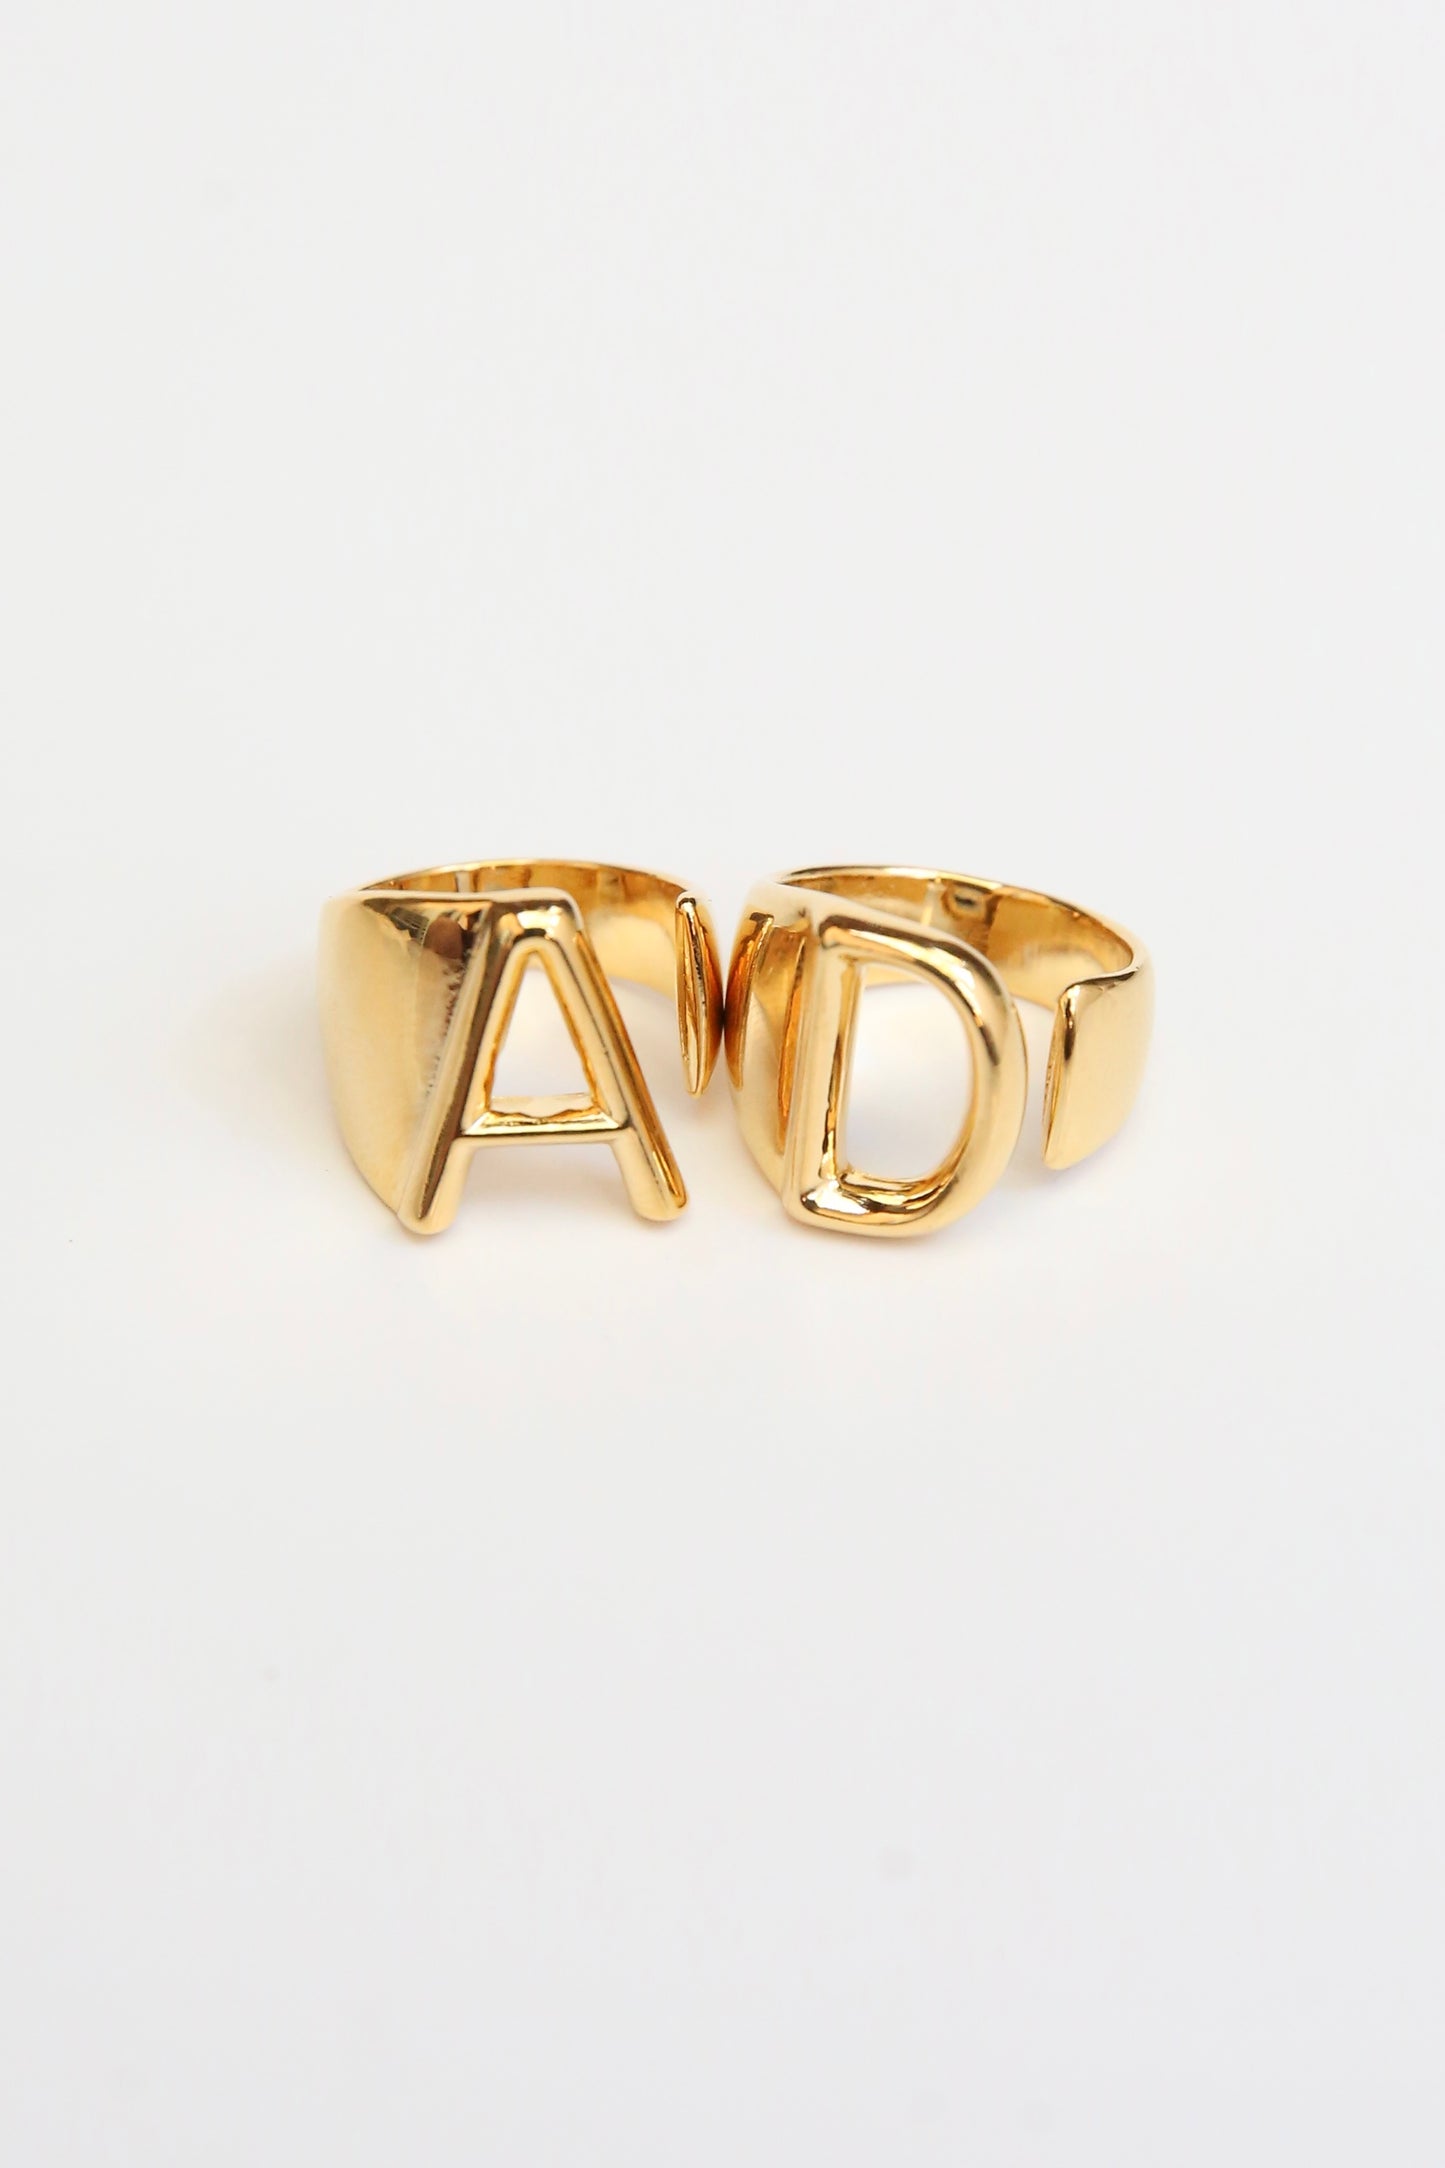 14k Gold AD ring set. A and D open banded ring on a white backdrop